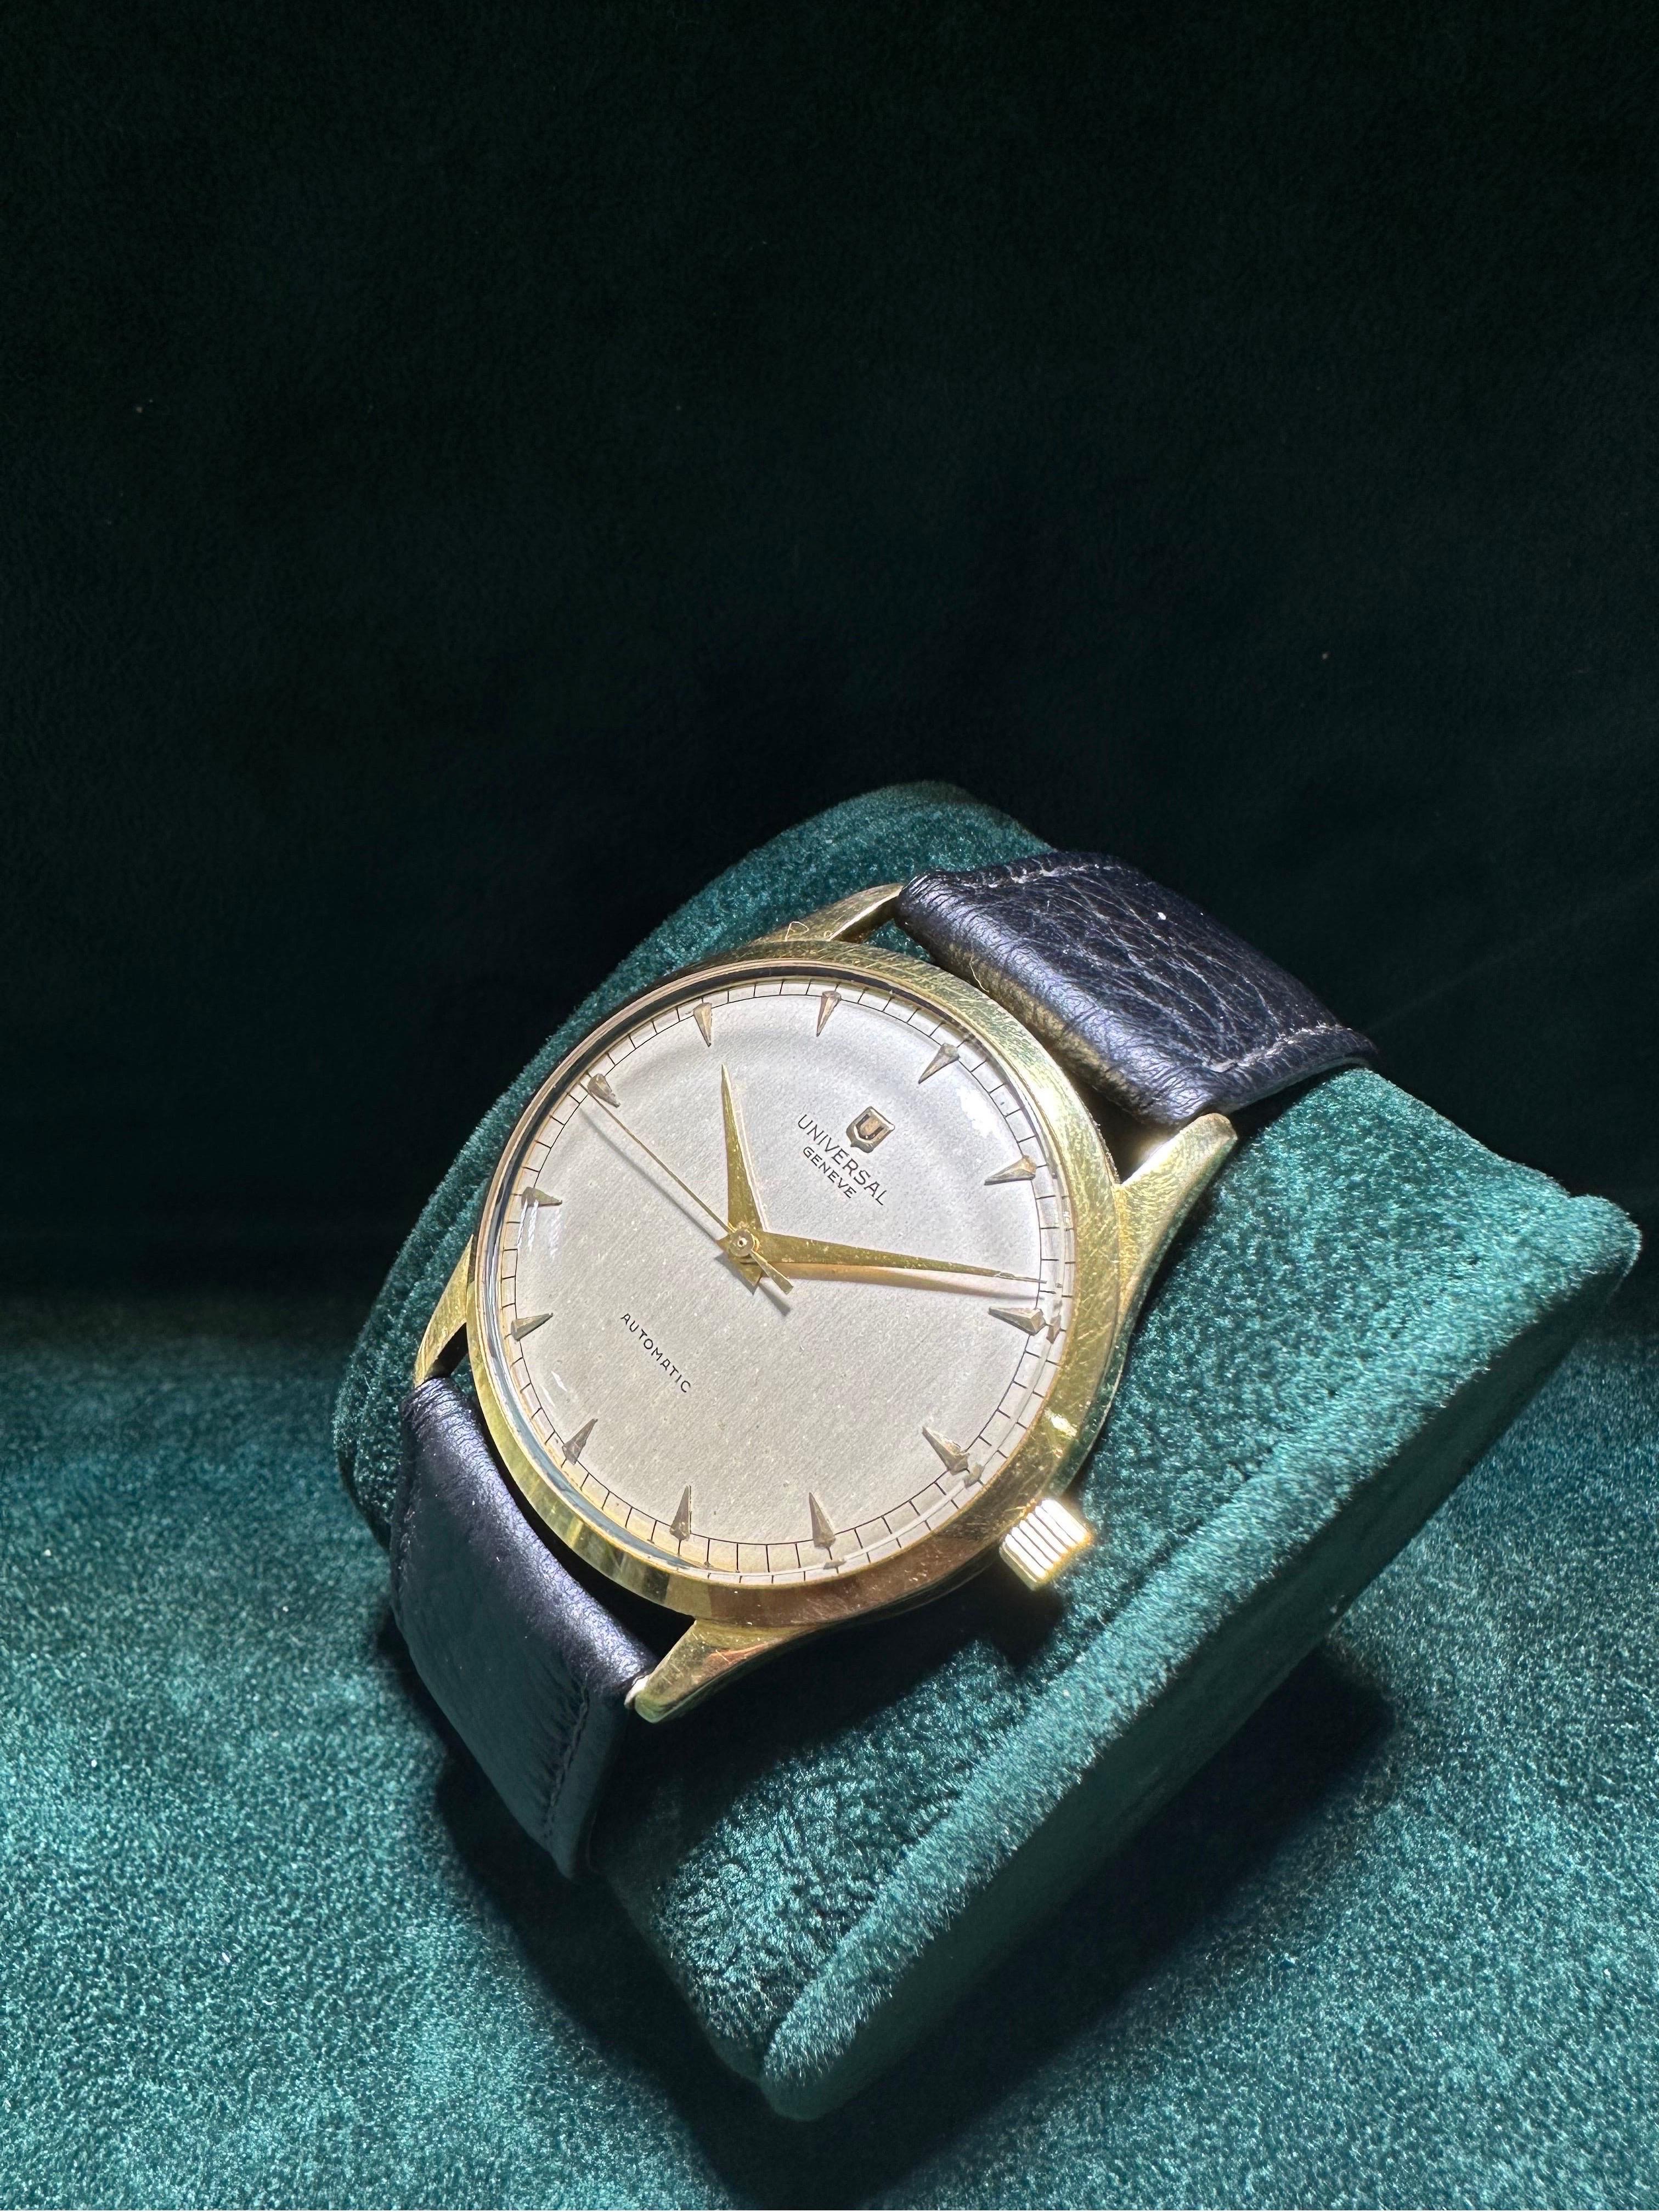 A very nice Universal Geneve watch made around 1950. The watch has a Bumer Automatic movement what was the precursor of the automatic watch we know today. This movement was used a lot by Omega, Jaeger Lecoultre and Universal Geneve. 
The caliber